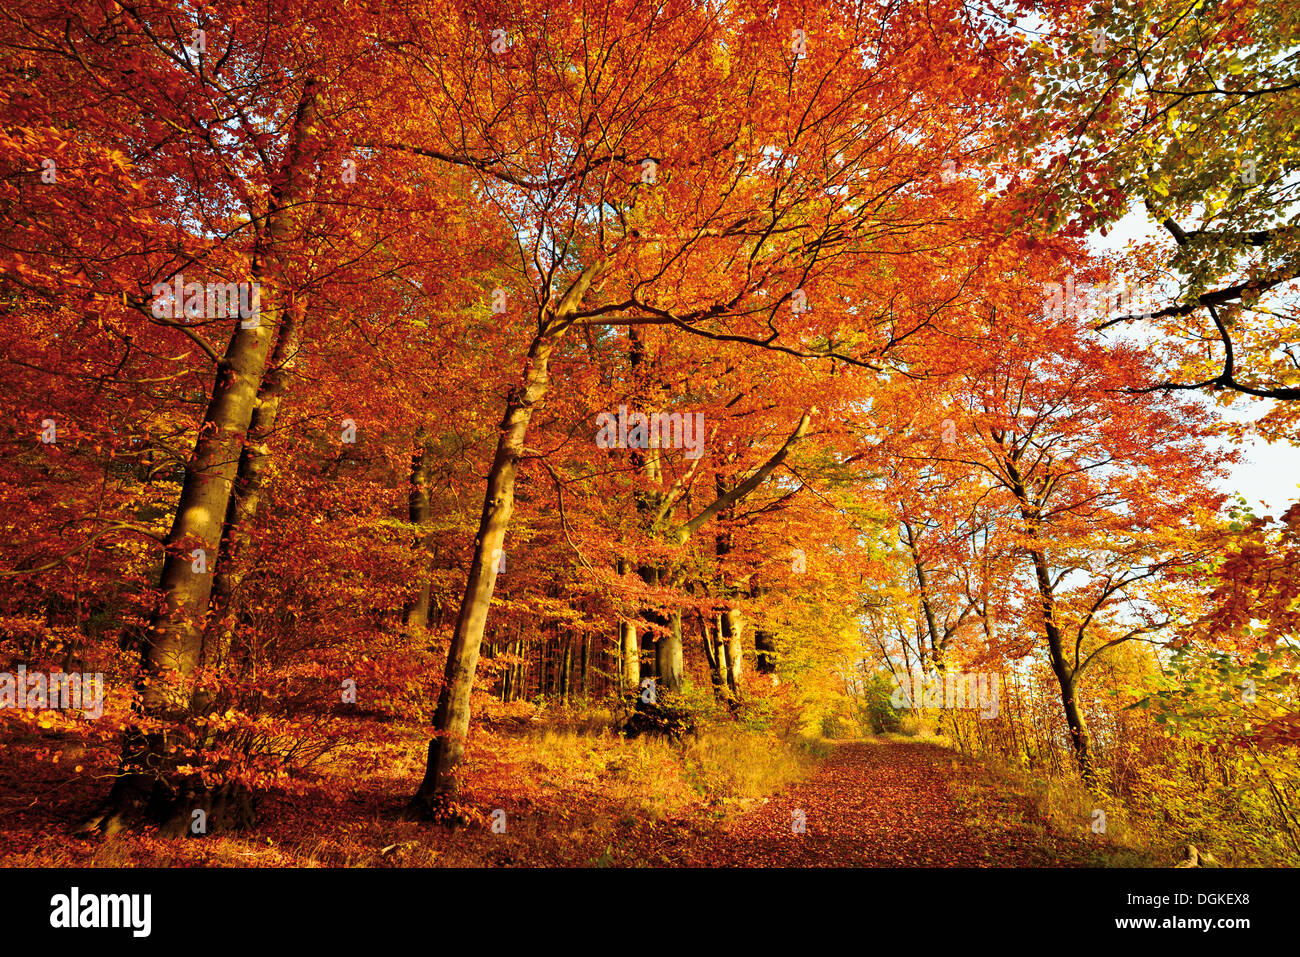 Germany, Nature Park Odenwald: Golden October with atumn forest at Katzenbuckel mountain Stock Photo